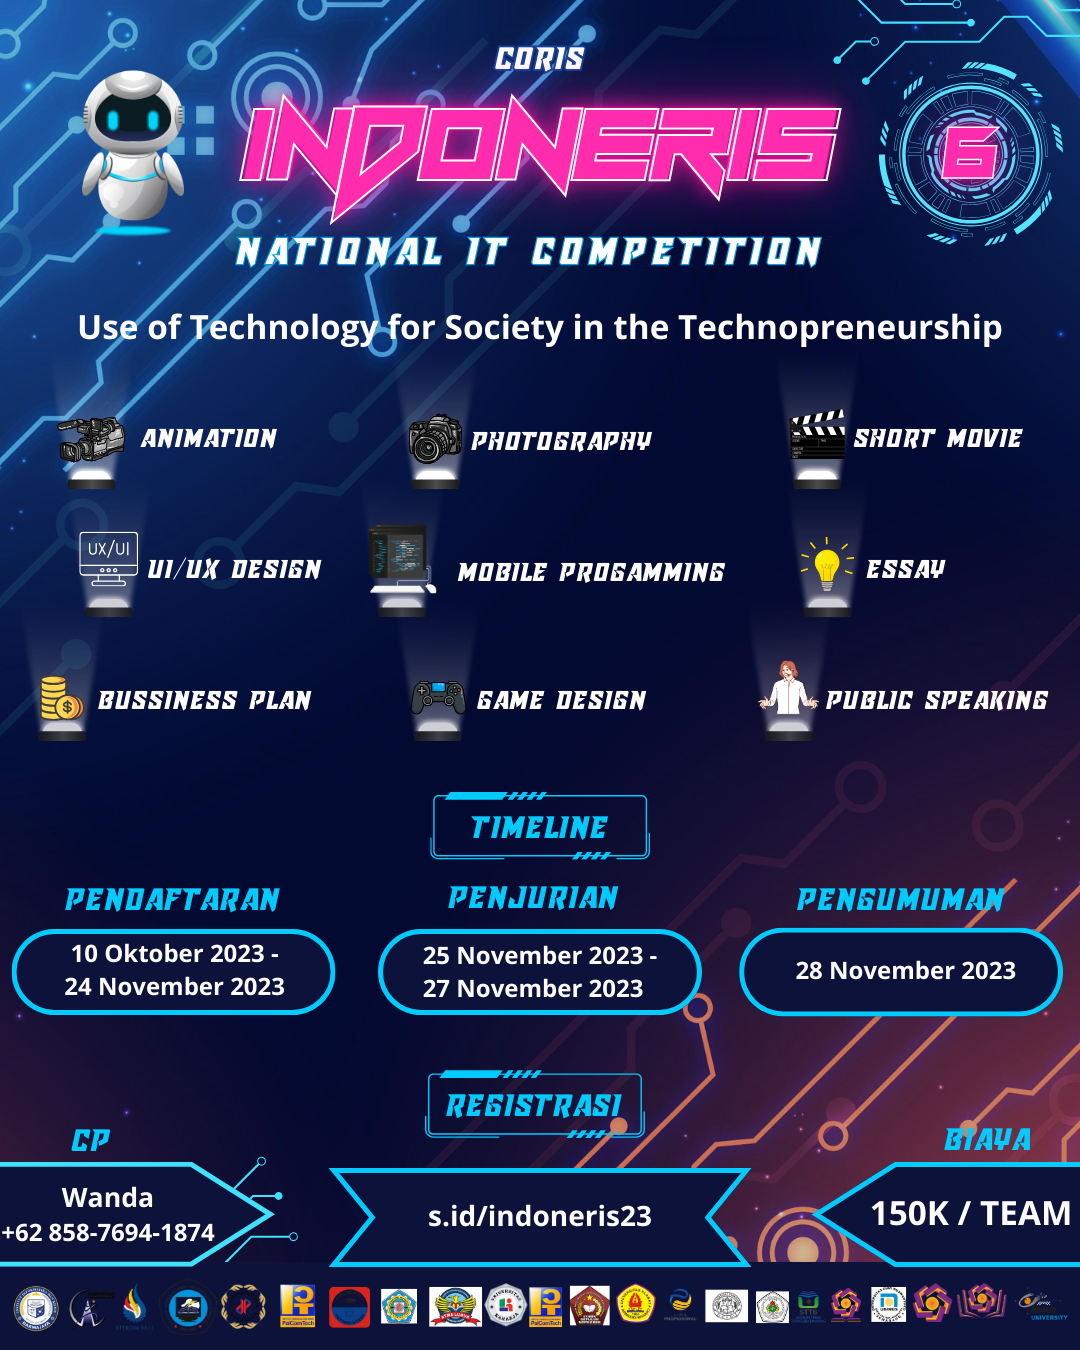 Indoneris National IT Competition